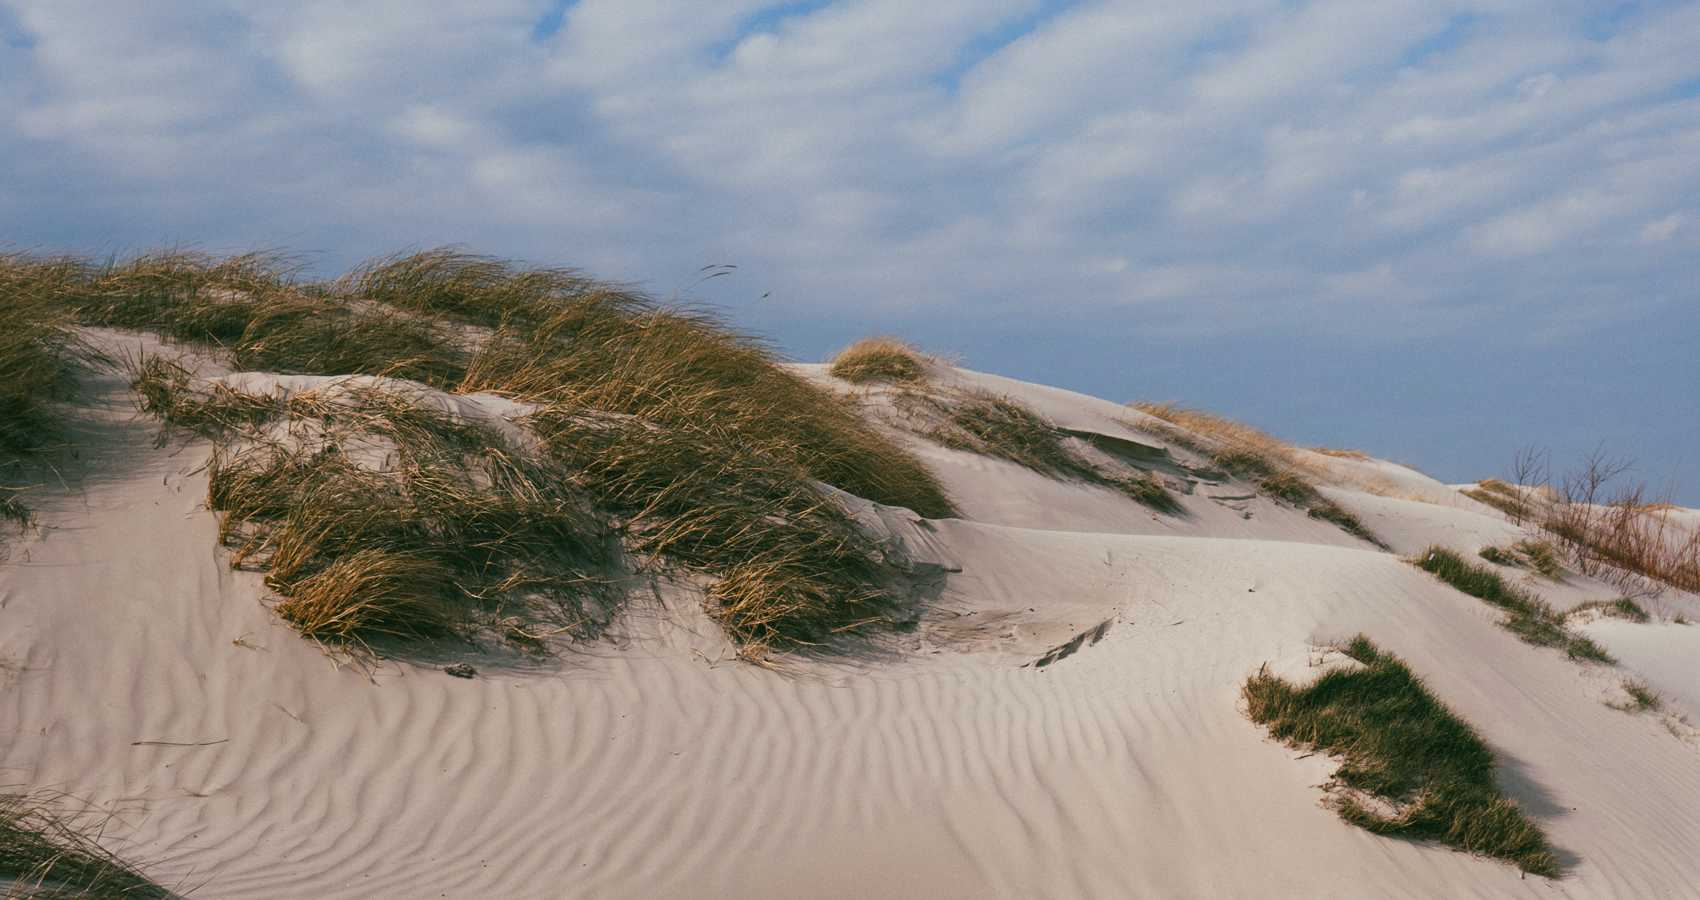 On Marram Hill, a poem by Paul Thwaites at Spillwords.com